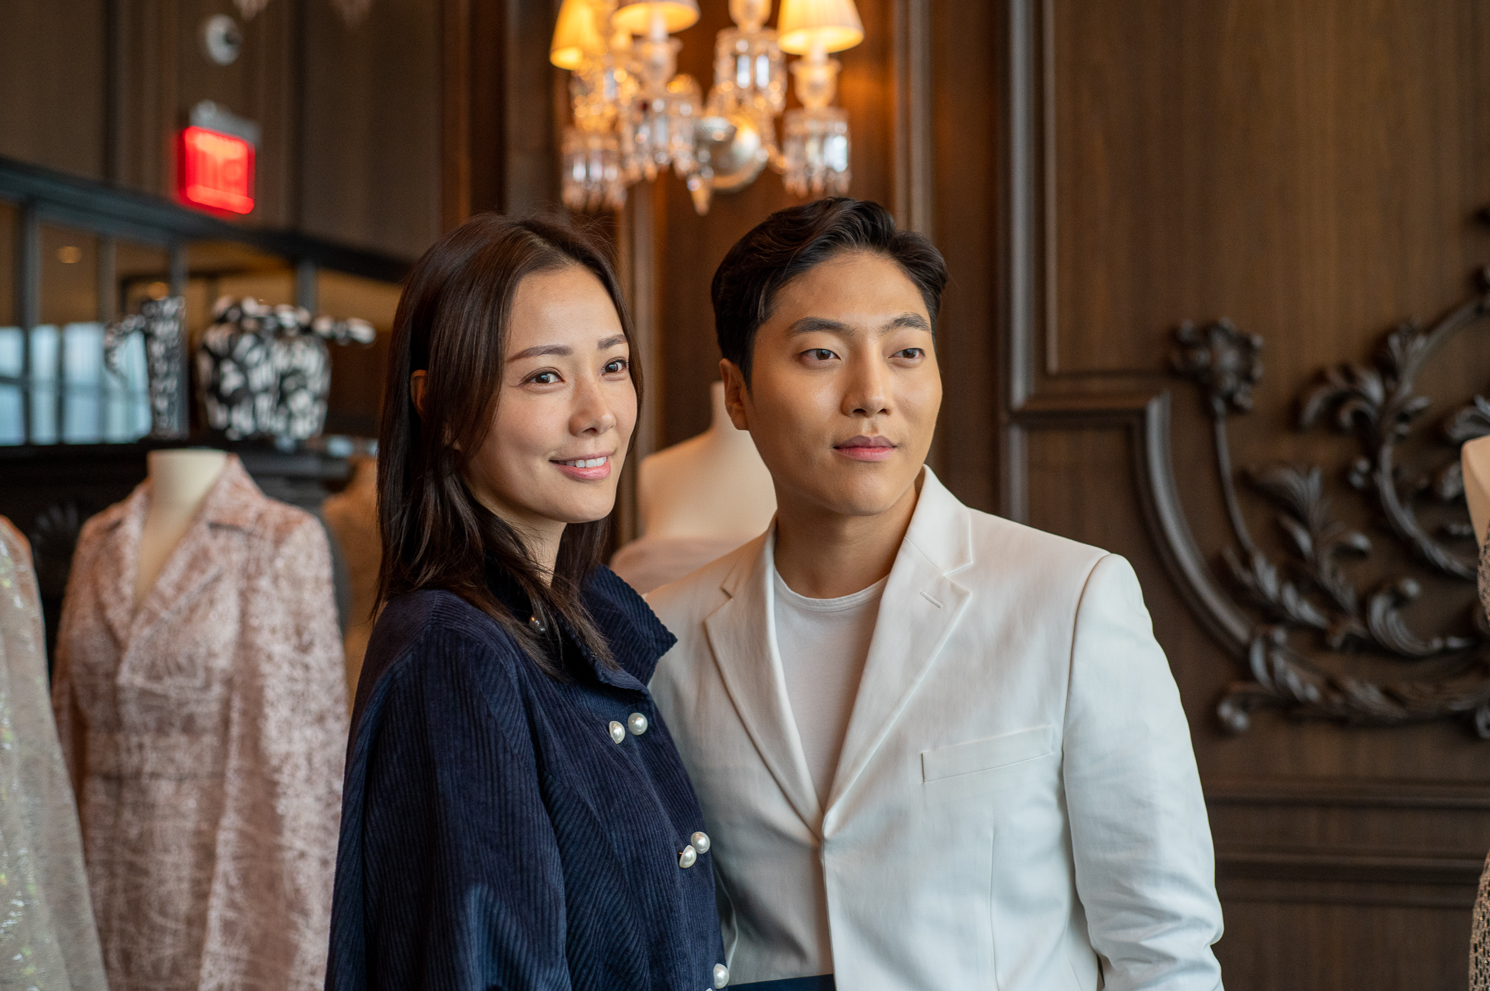 Son Tae-young wearing a navy jacket and Andrew Kwon wearing a white suit, standing in front of a chandelier.